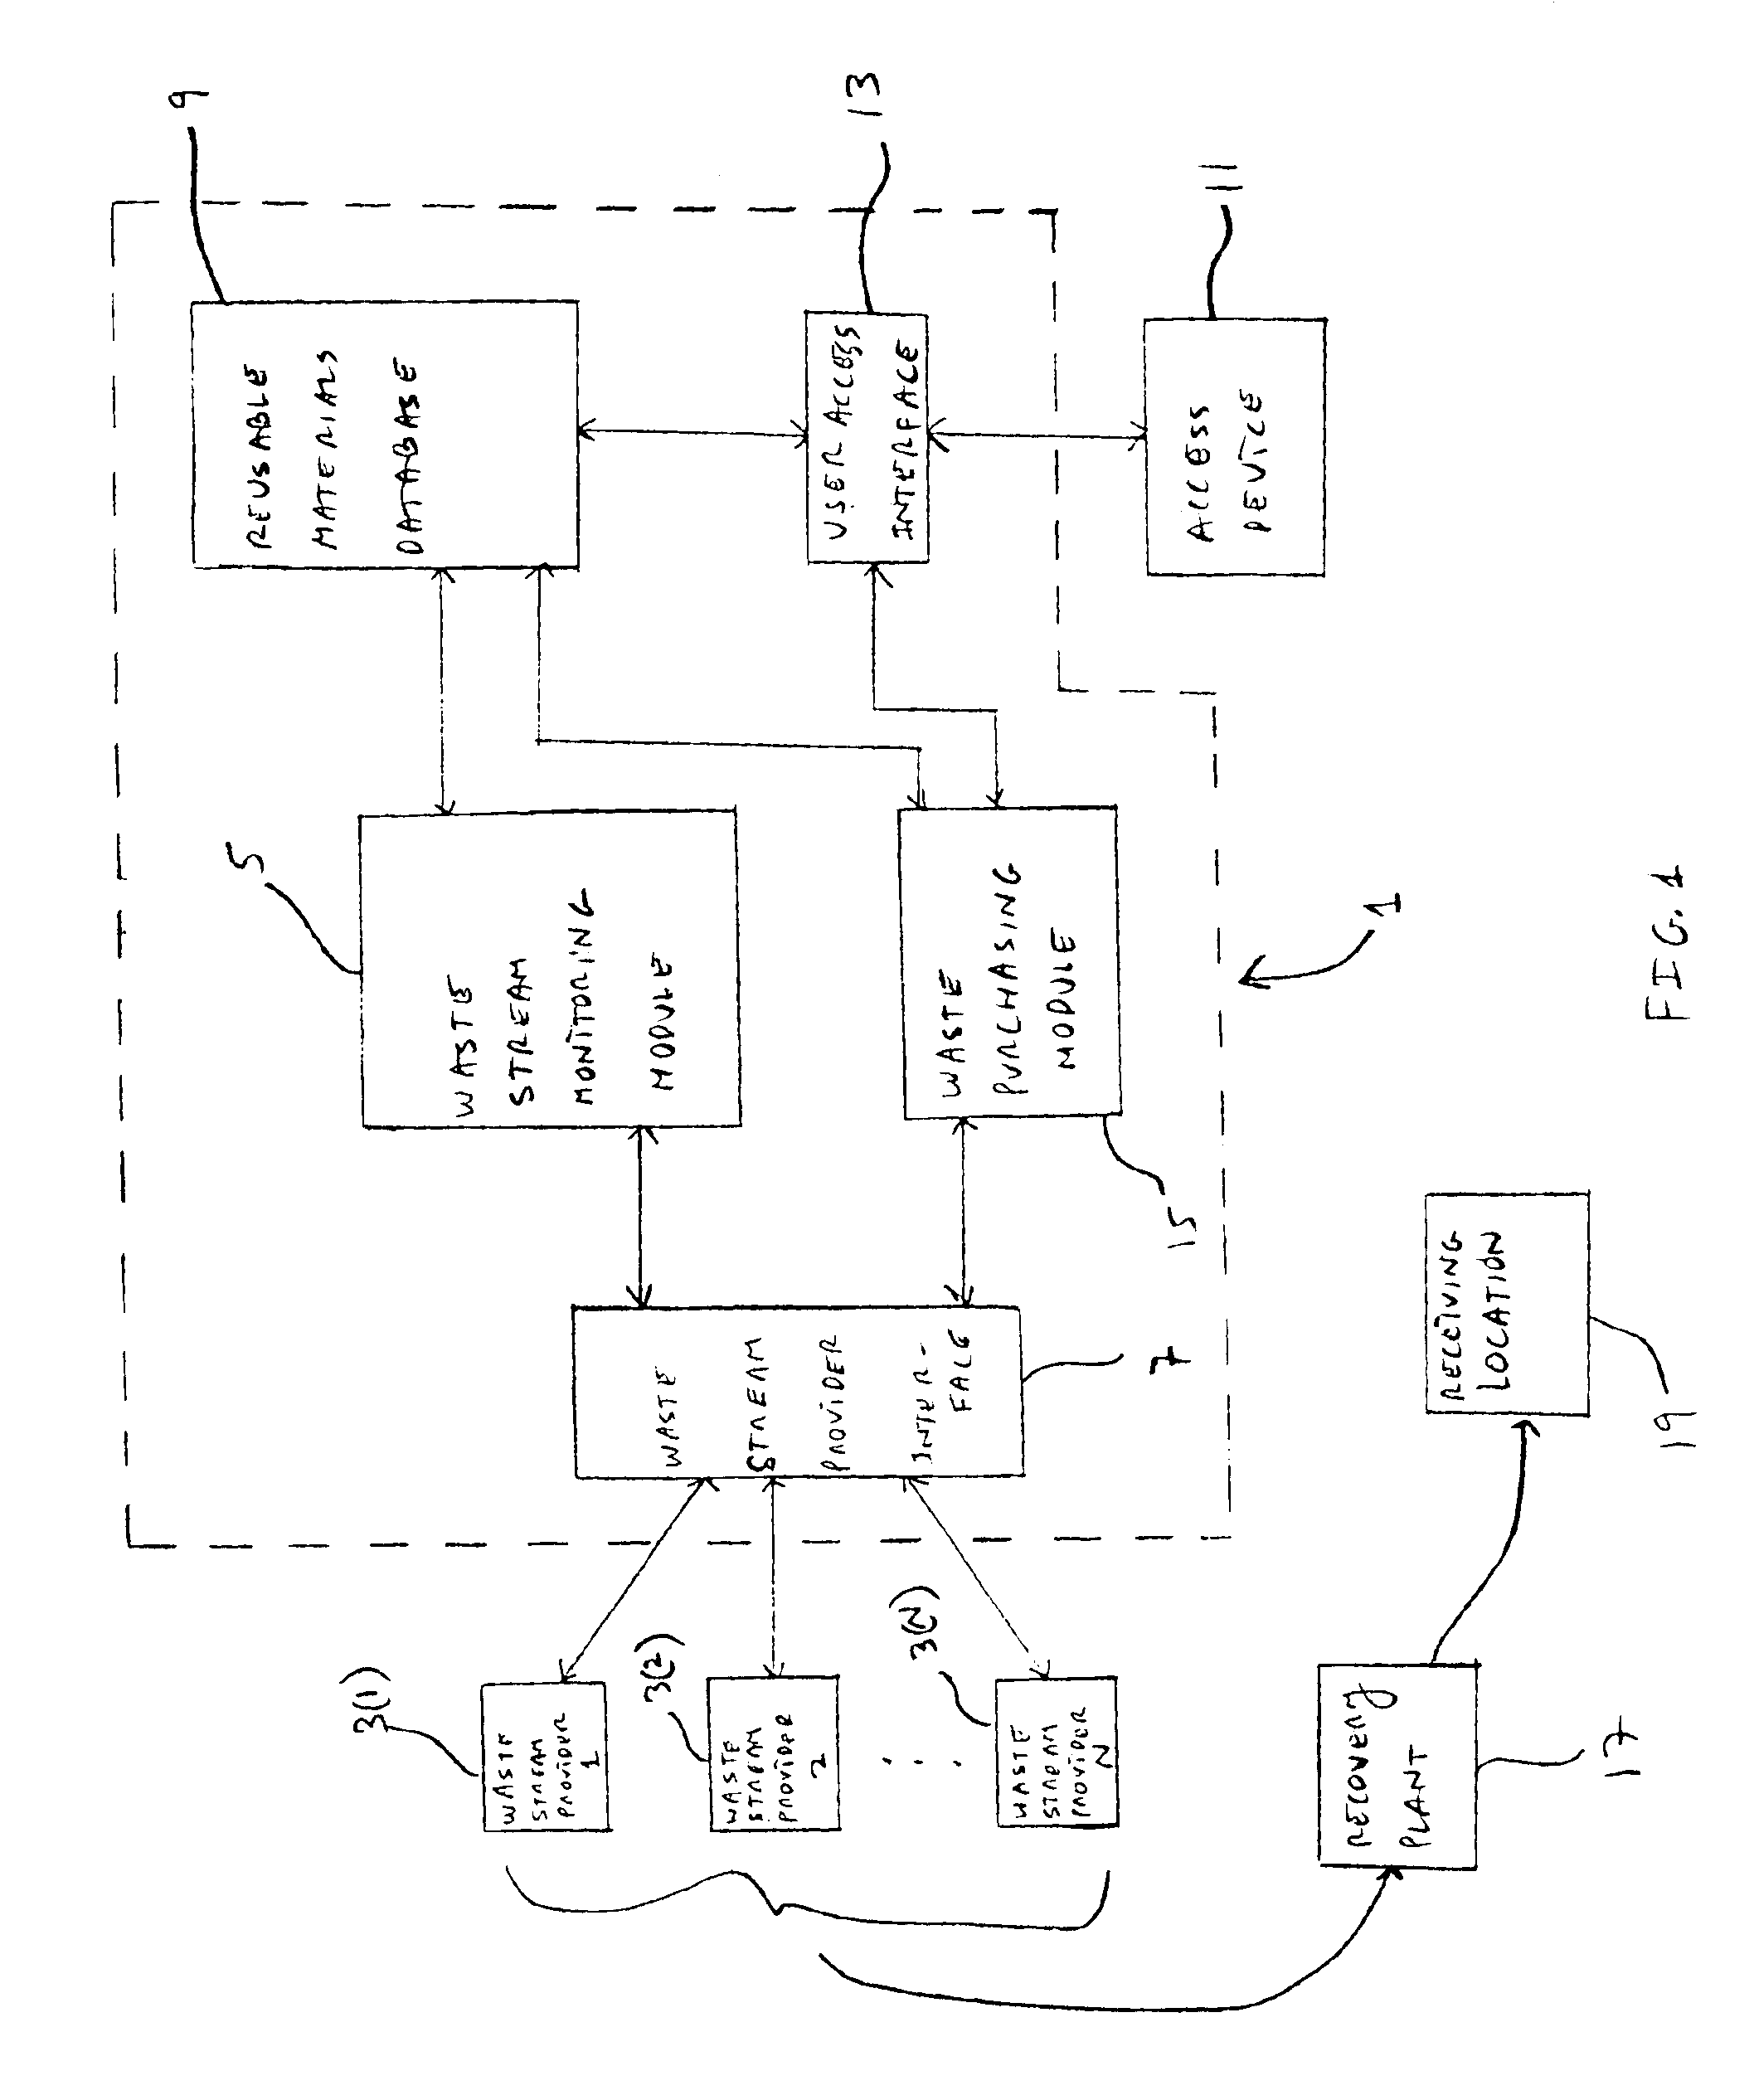 Method and system for recycling materials